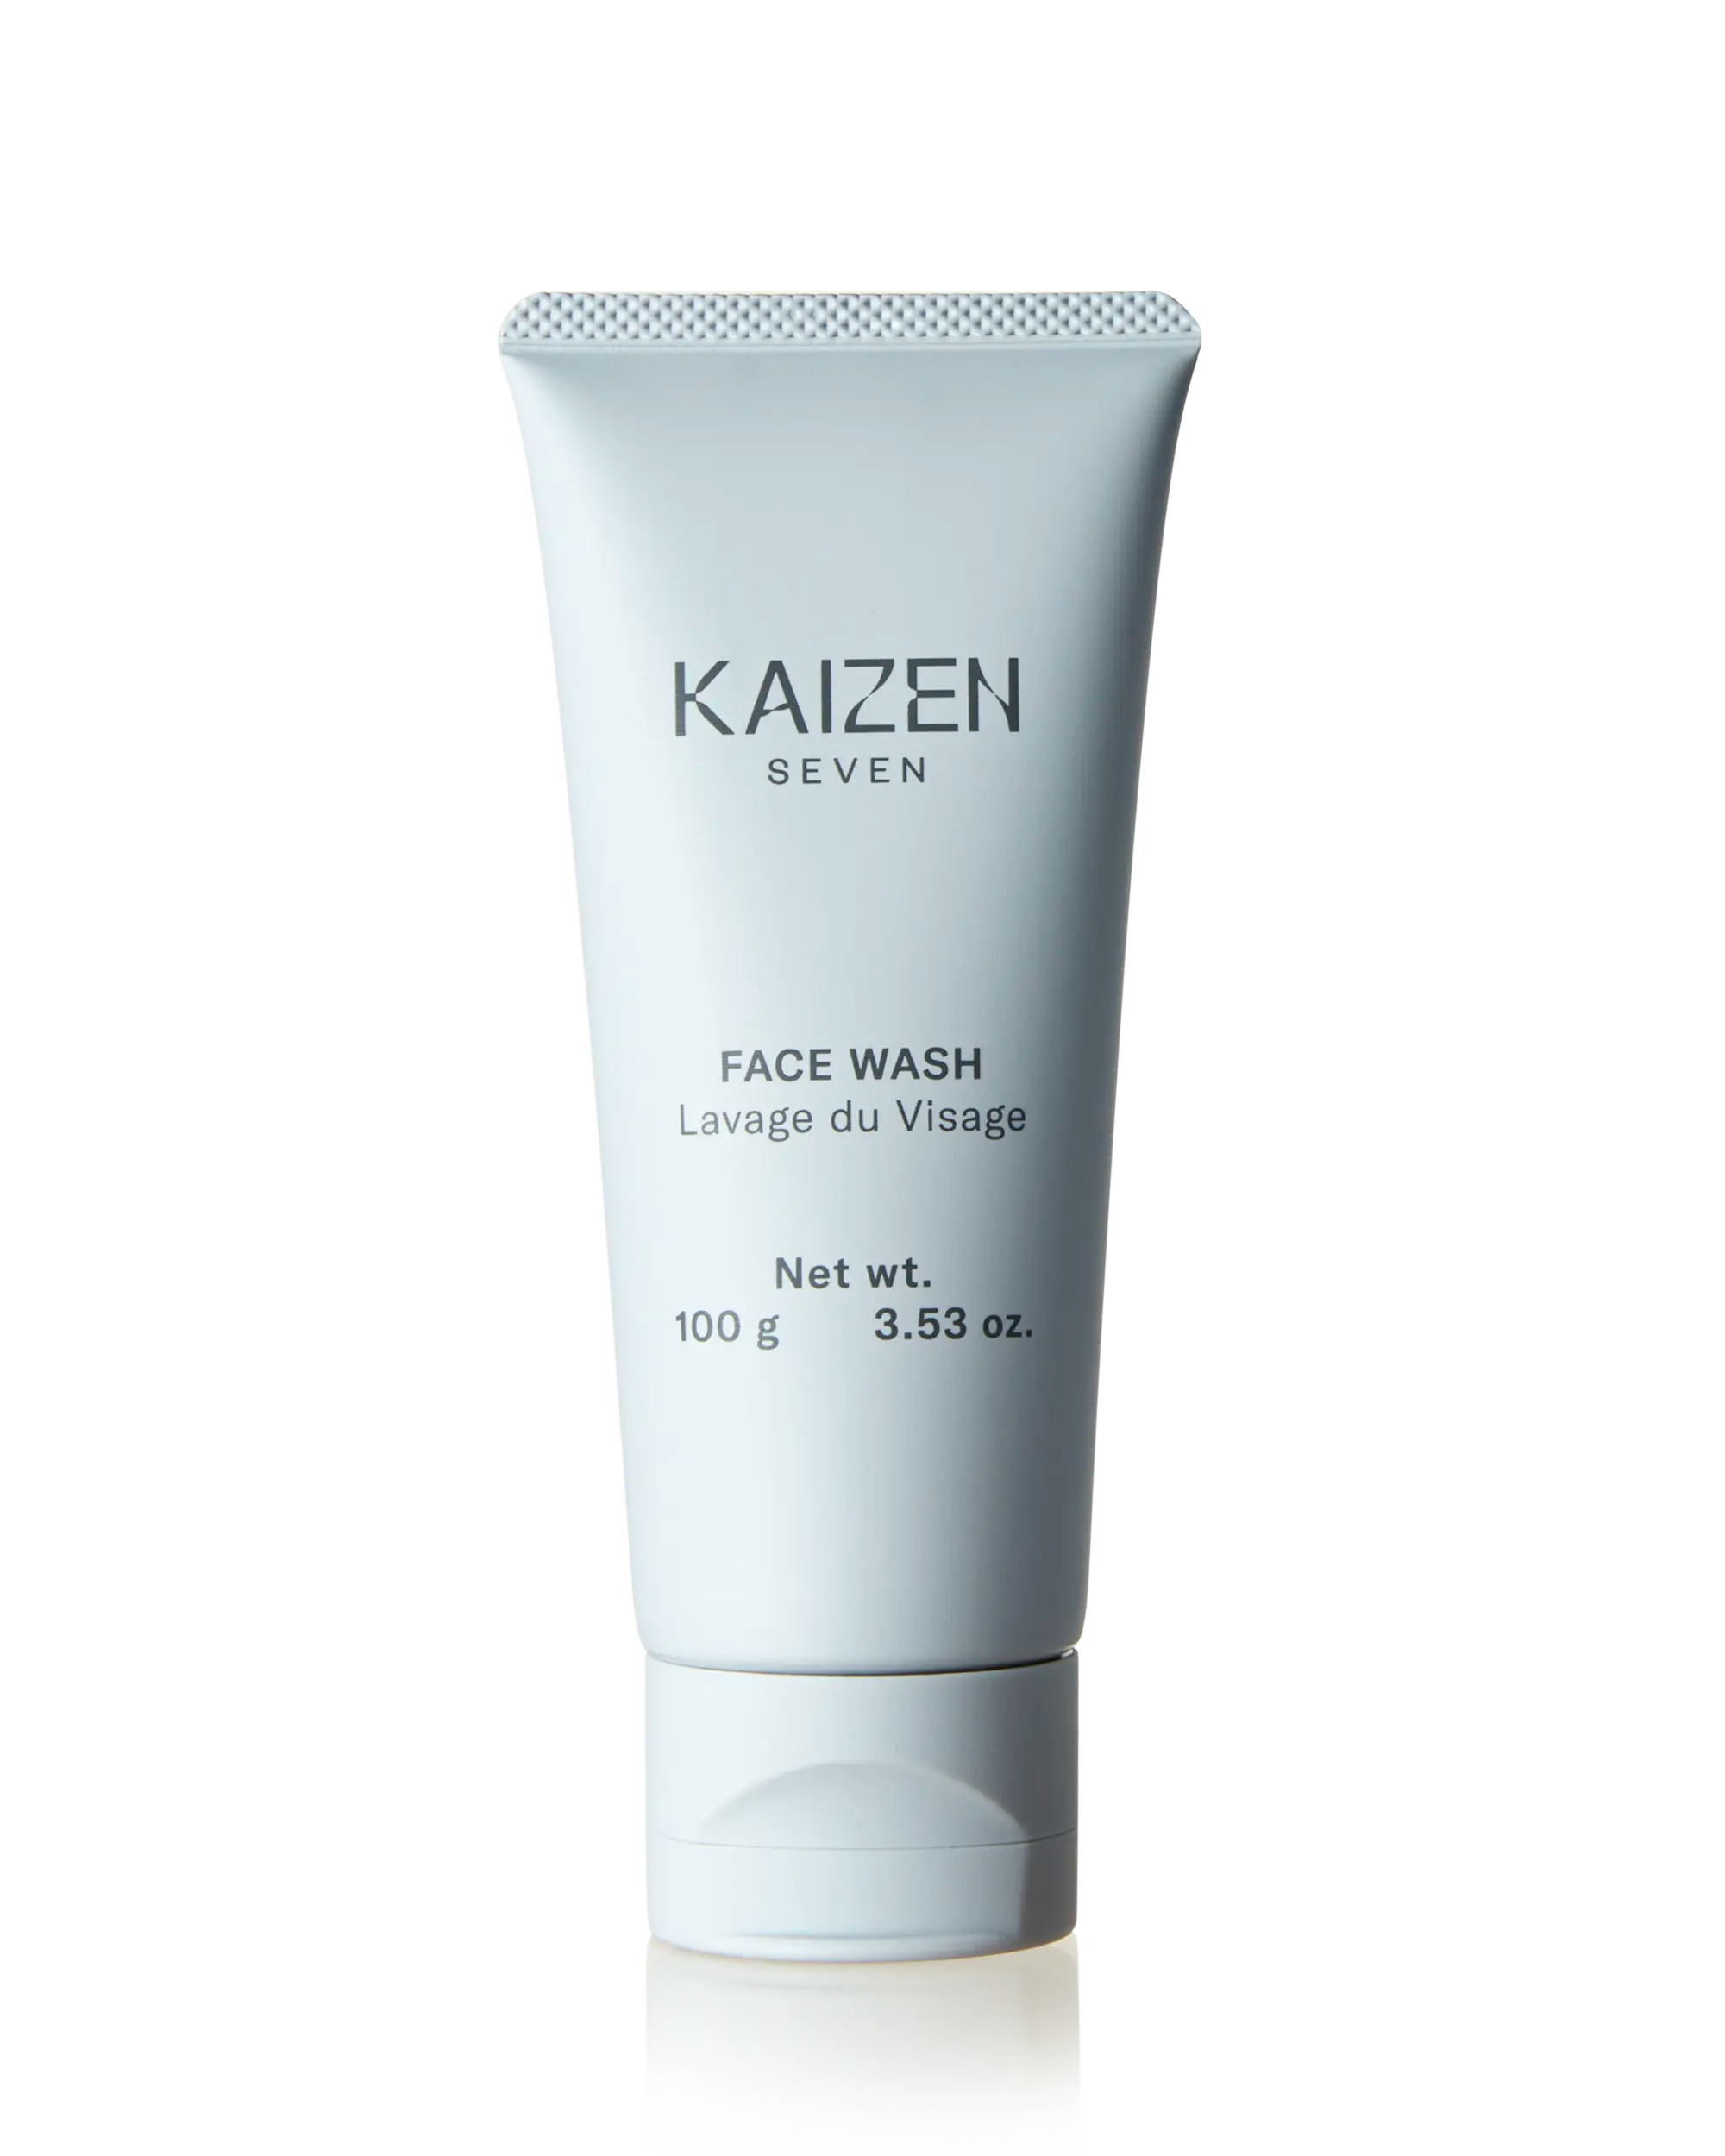 Photo of Kaizen Seven Face Wash product standing with white background